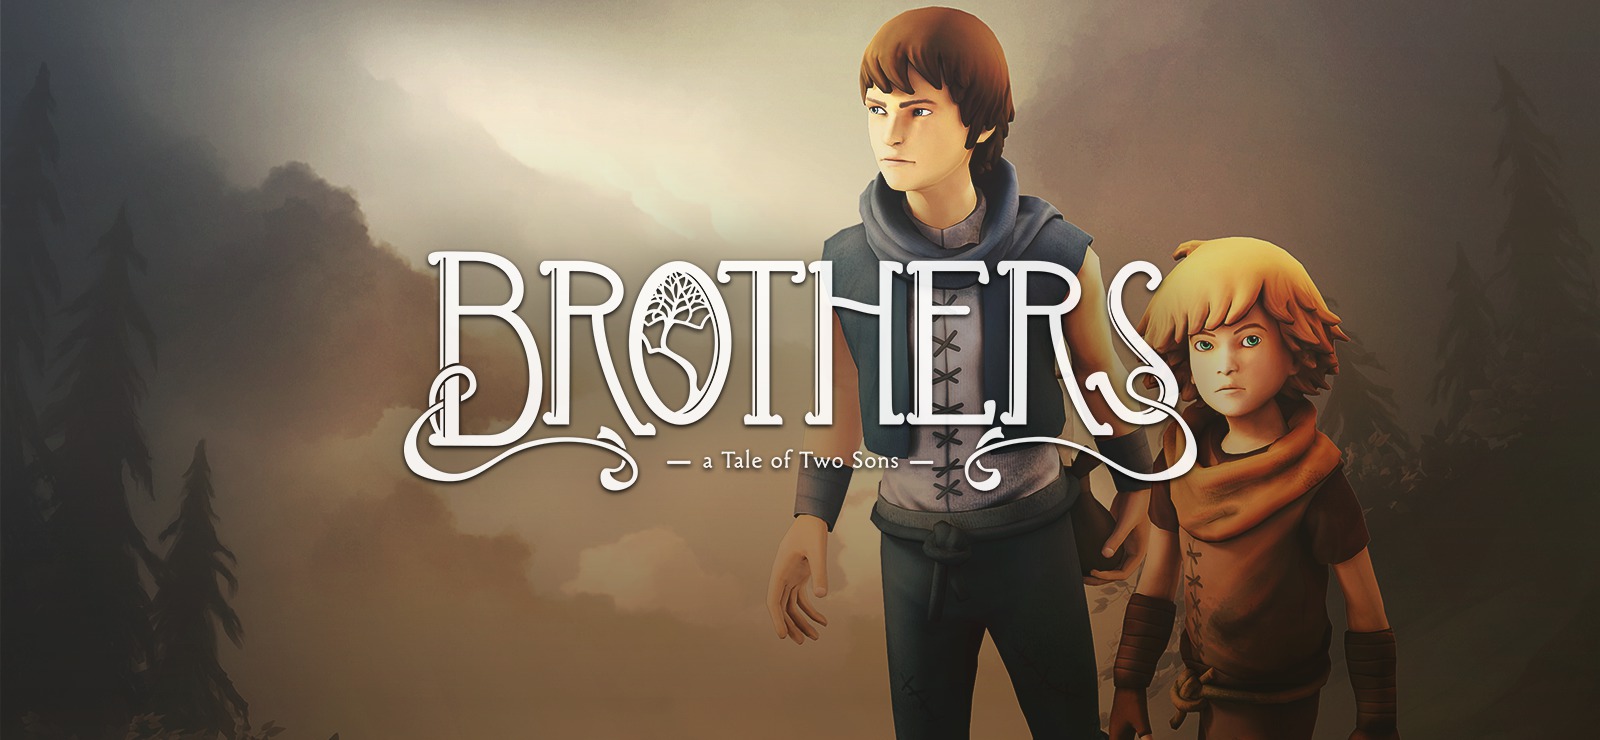 Brothers - A Tale of Two Sons #3 (упоротое прохождение).